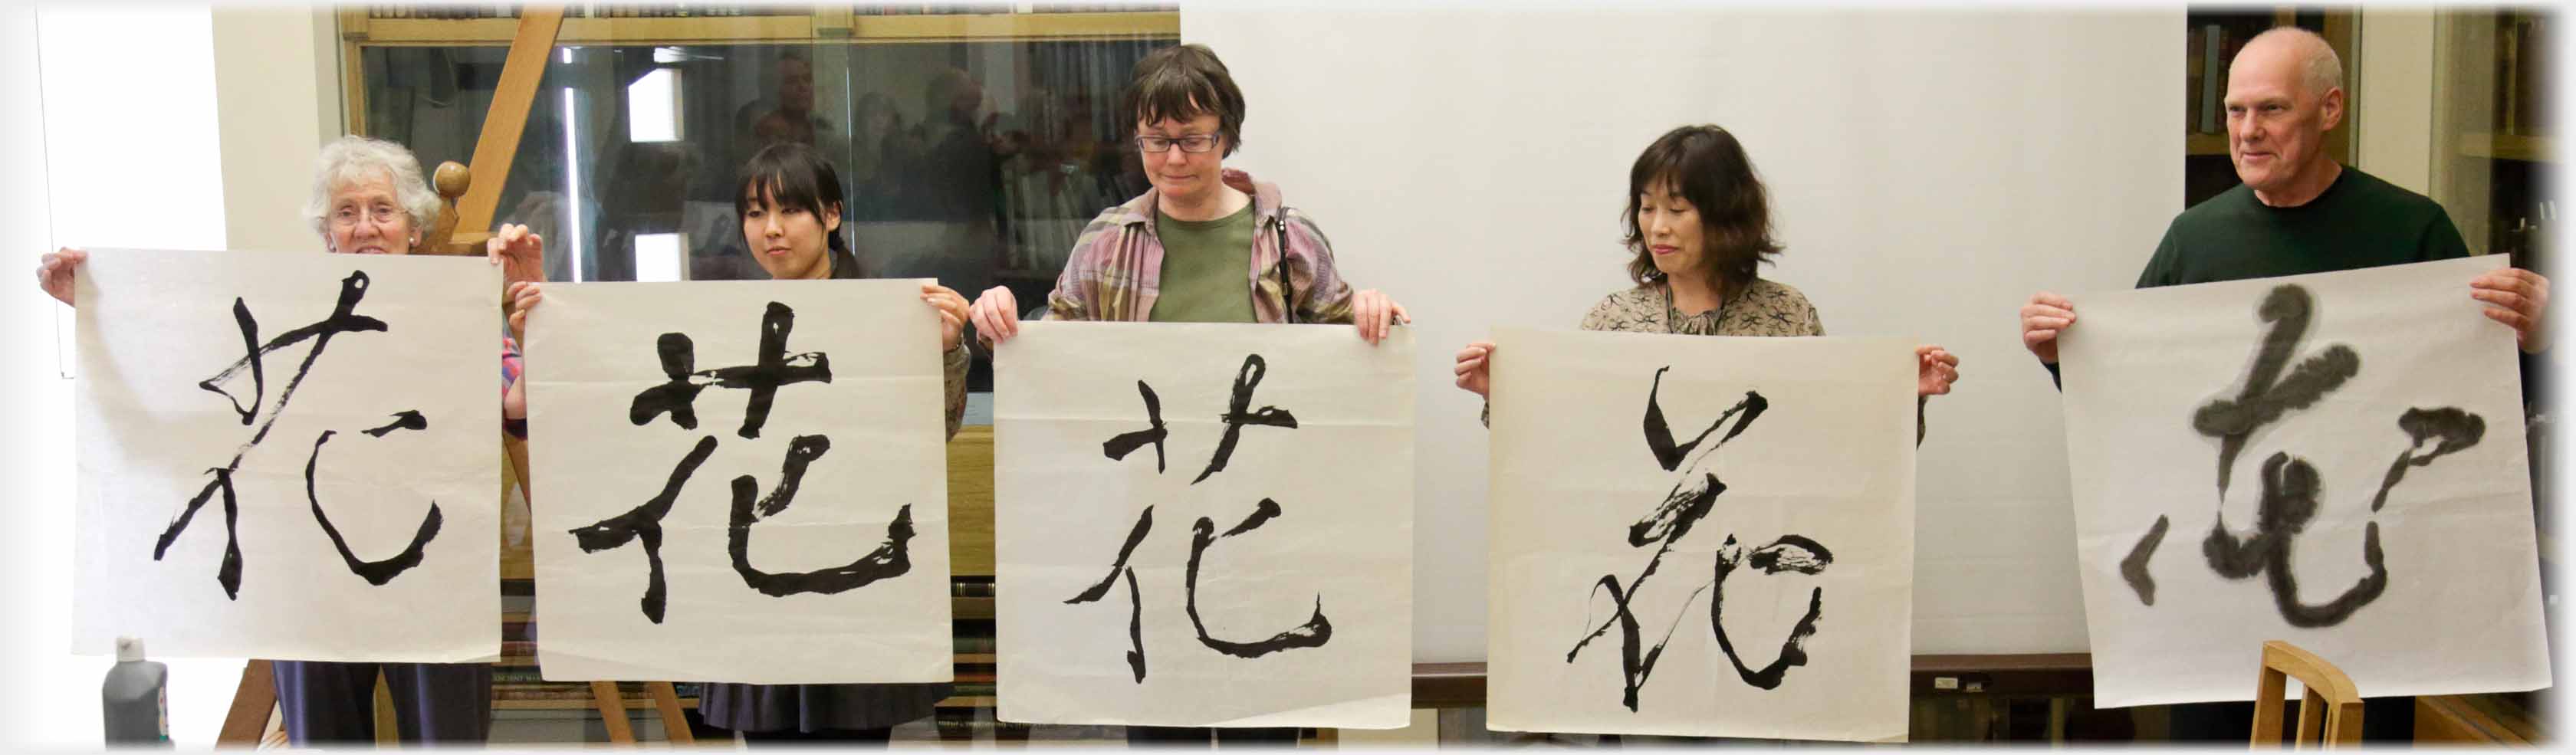 Five people in line each holding large sheet of paper with a character on it.